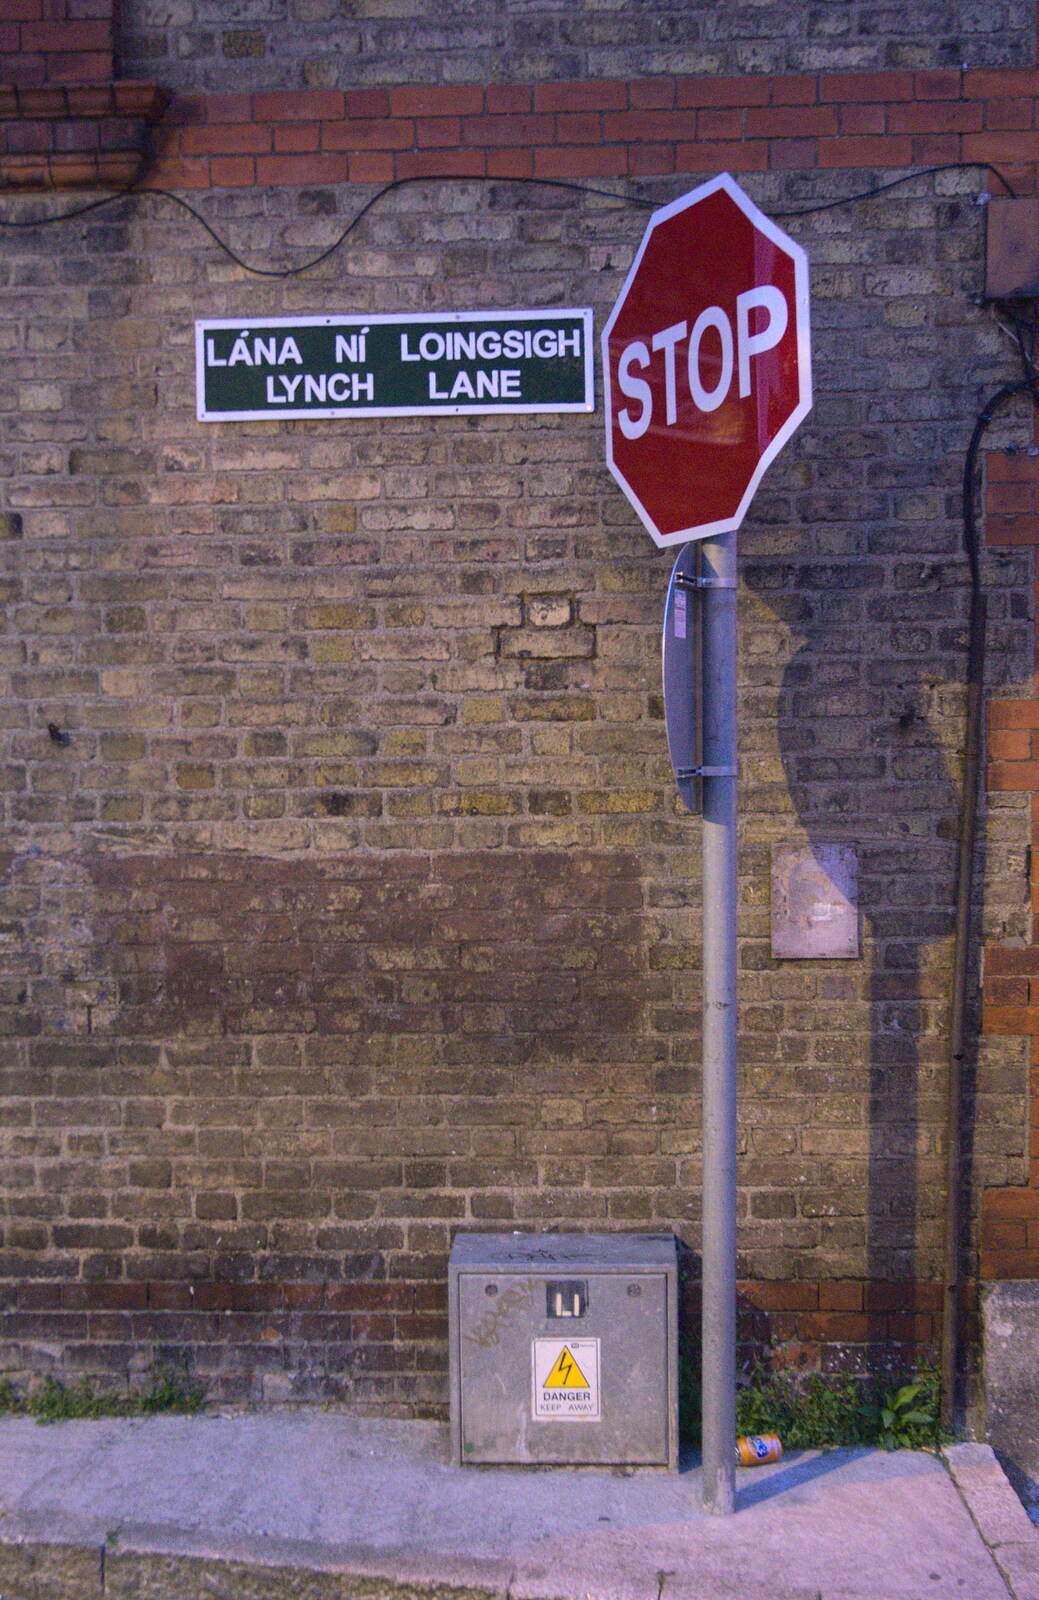 Stop sign on Lynch Lane from Temple Bar and Dun Laoghaire, Dublin, Ireland - 16th April 2015